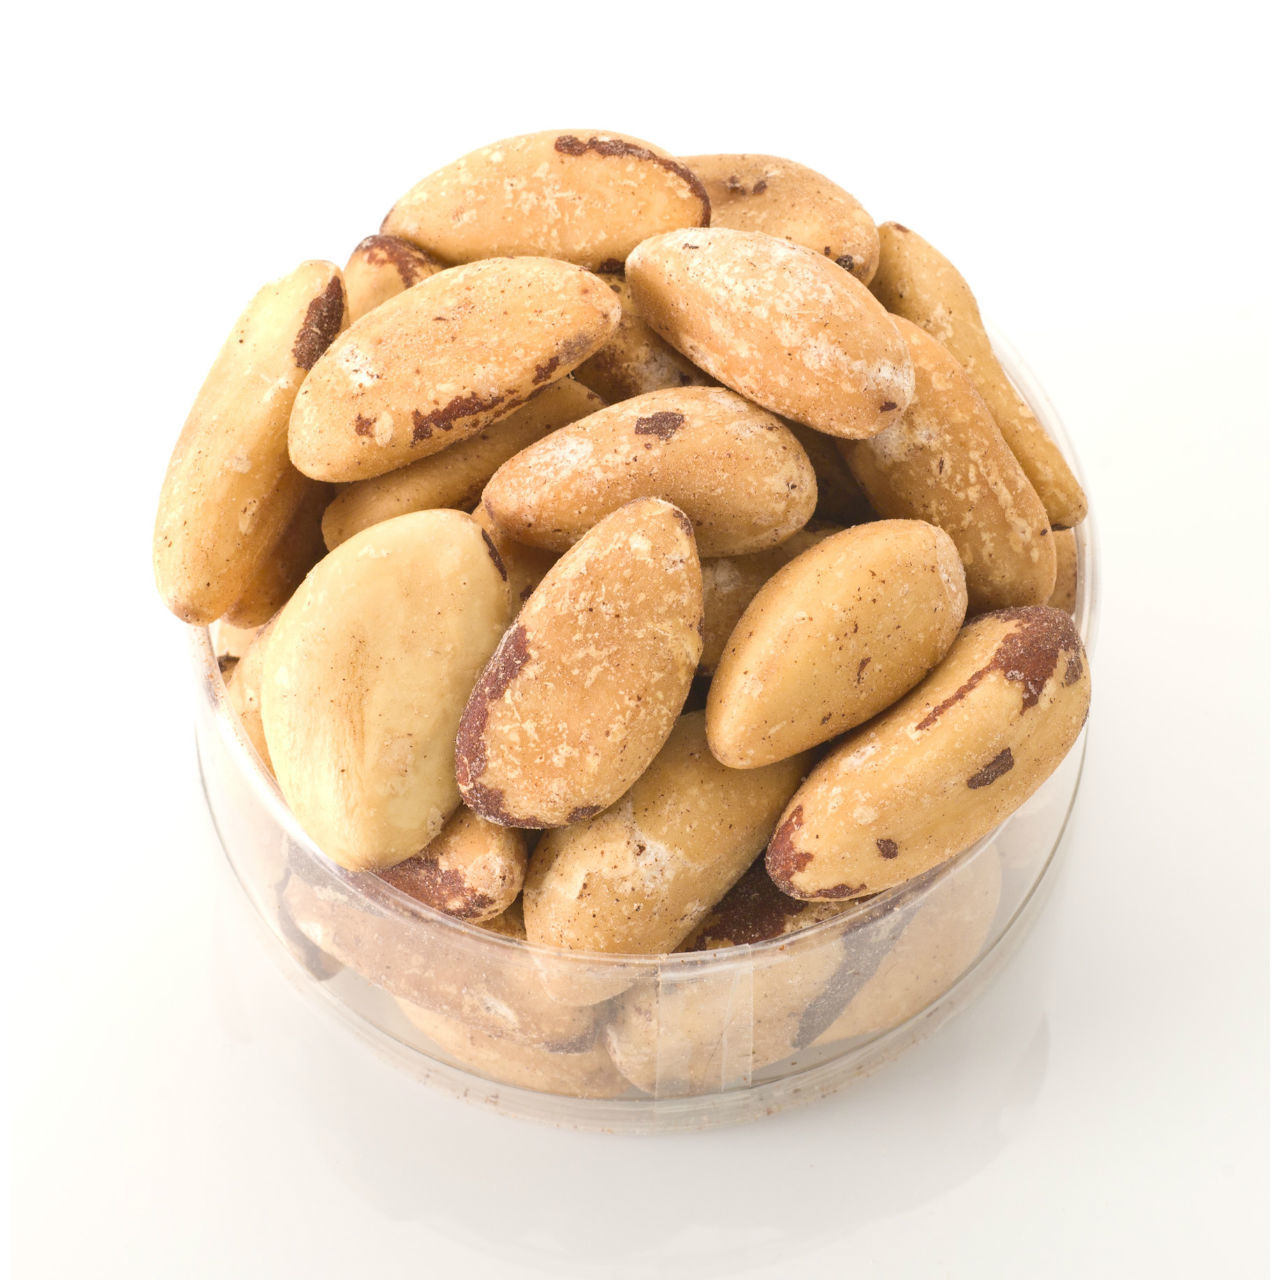 What are the benefits of salted Brazil nuts?